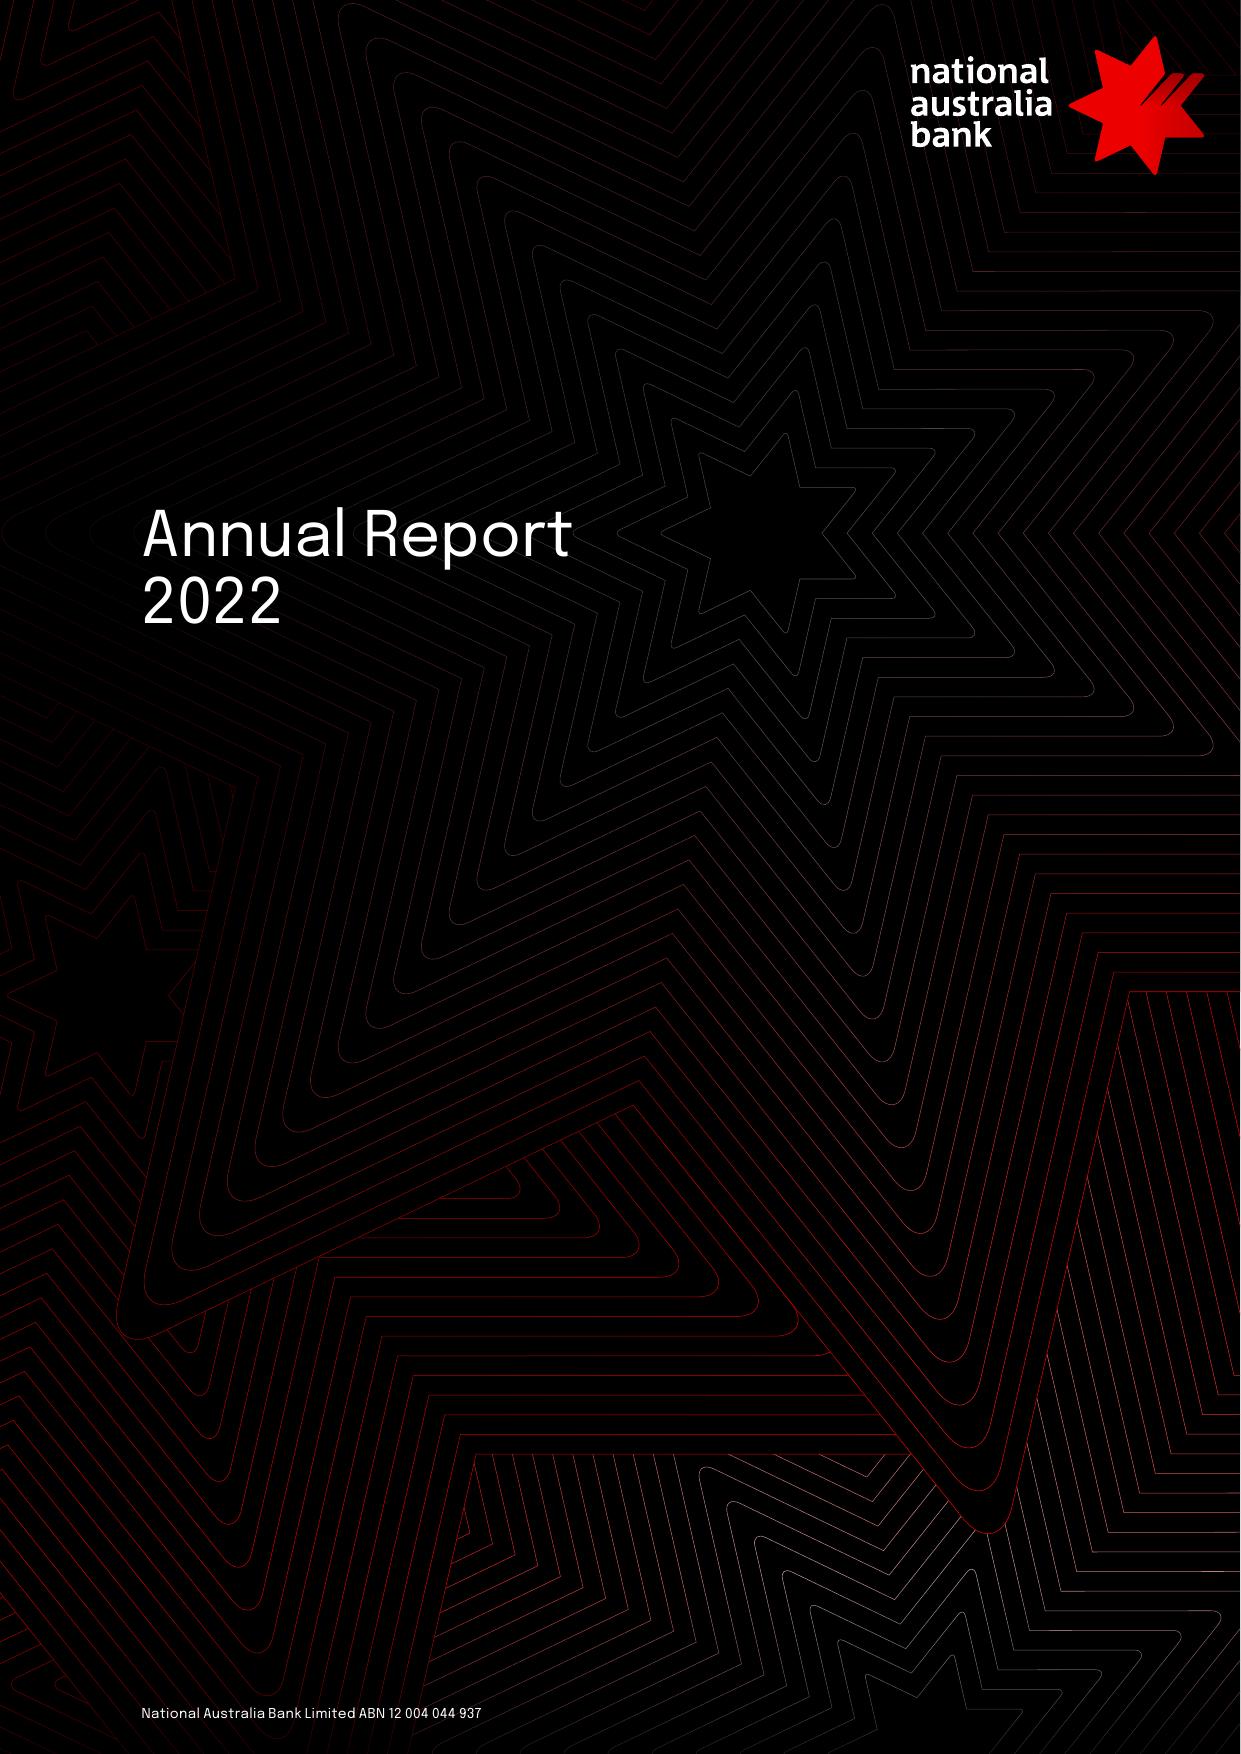 MORTGAGEHOUSE 2022 Annual Report